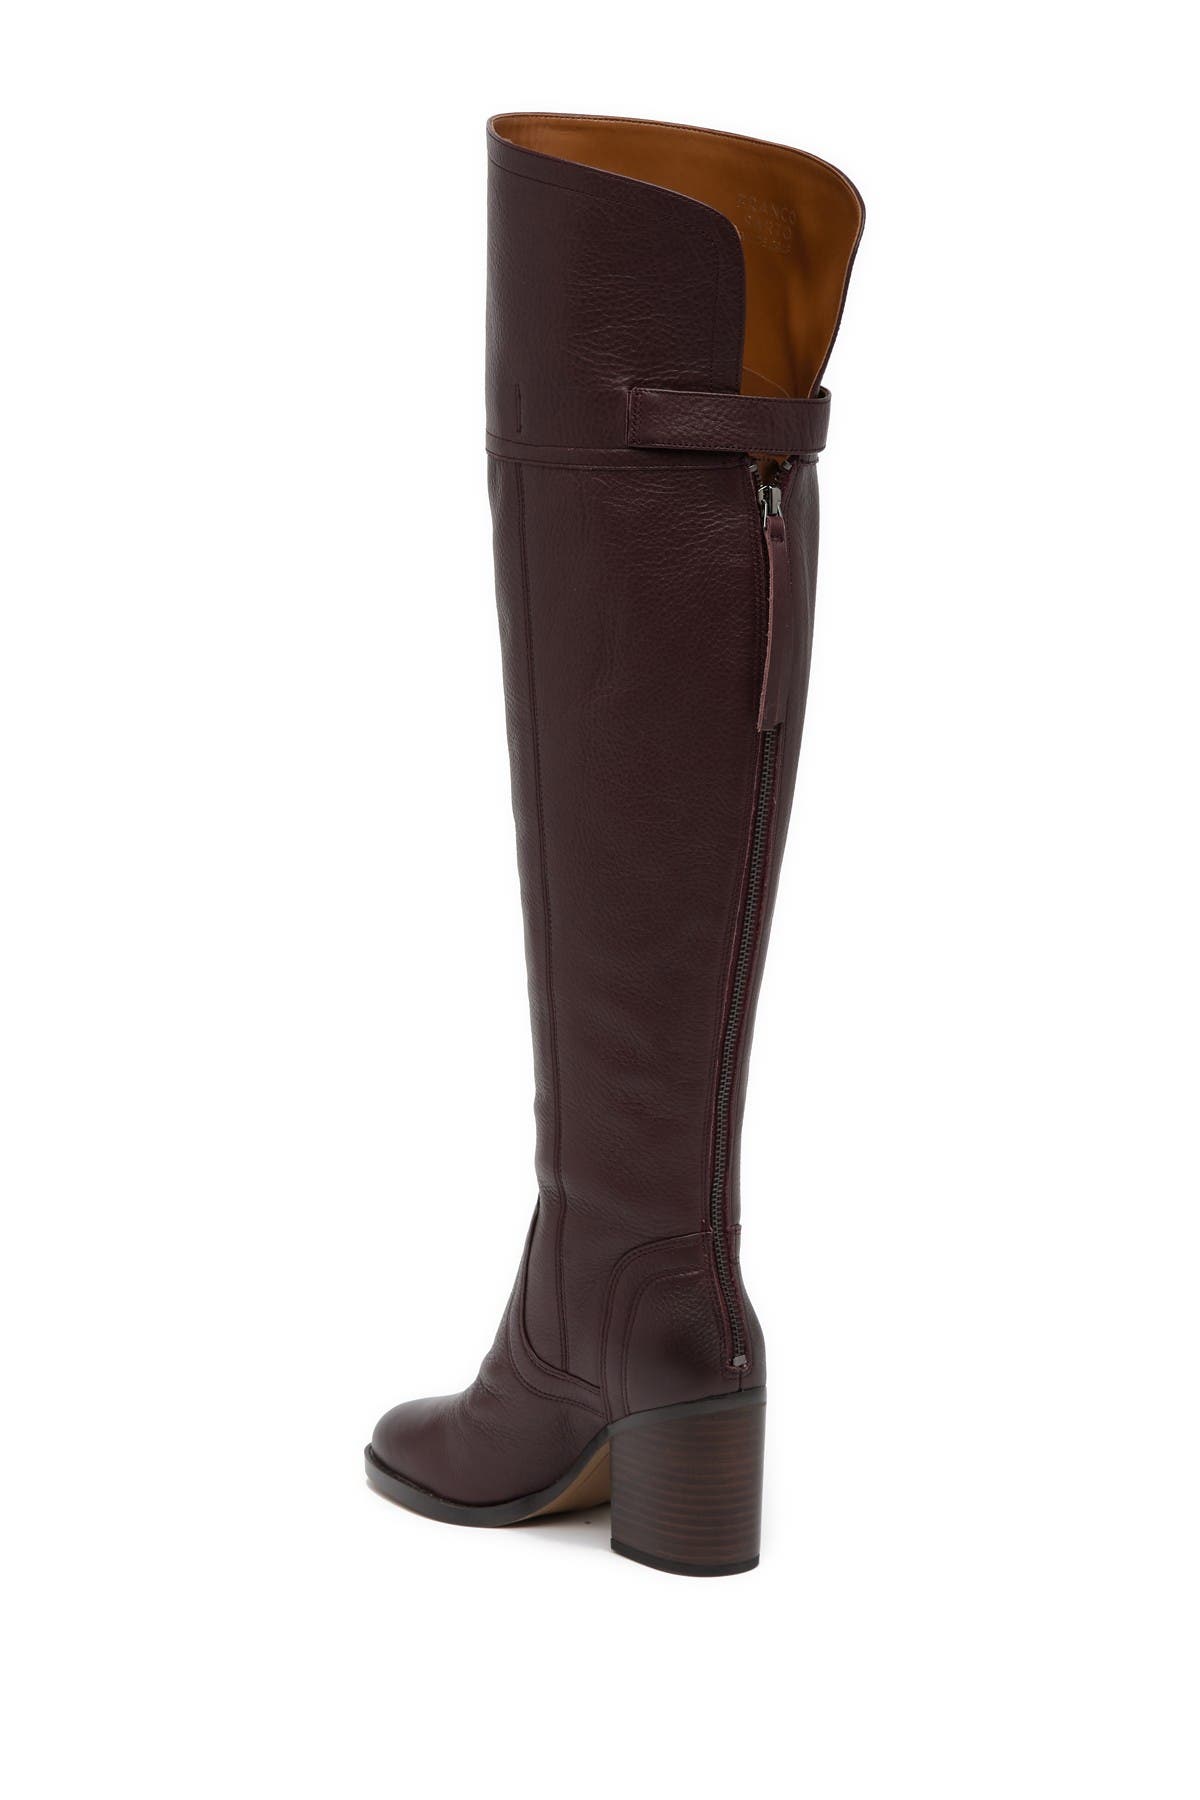 franco sarto wide calf over the knee boots